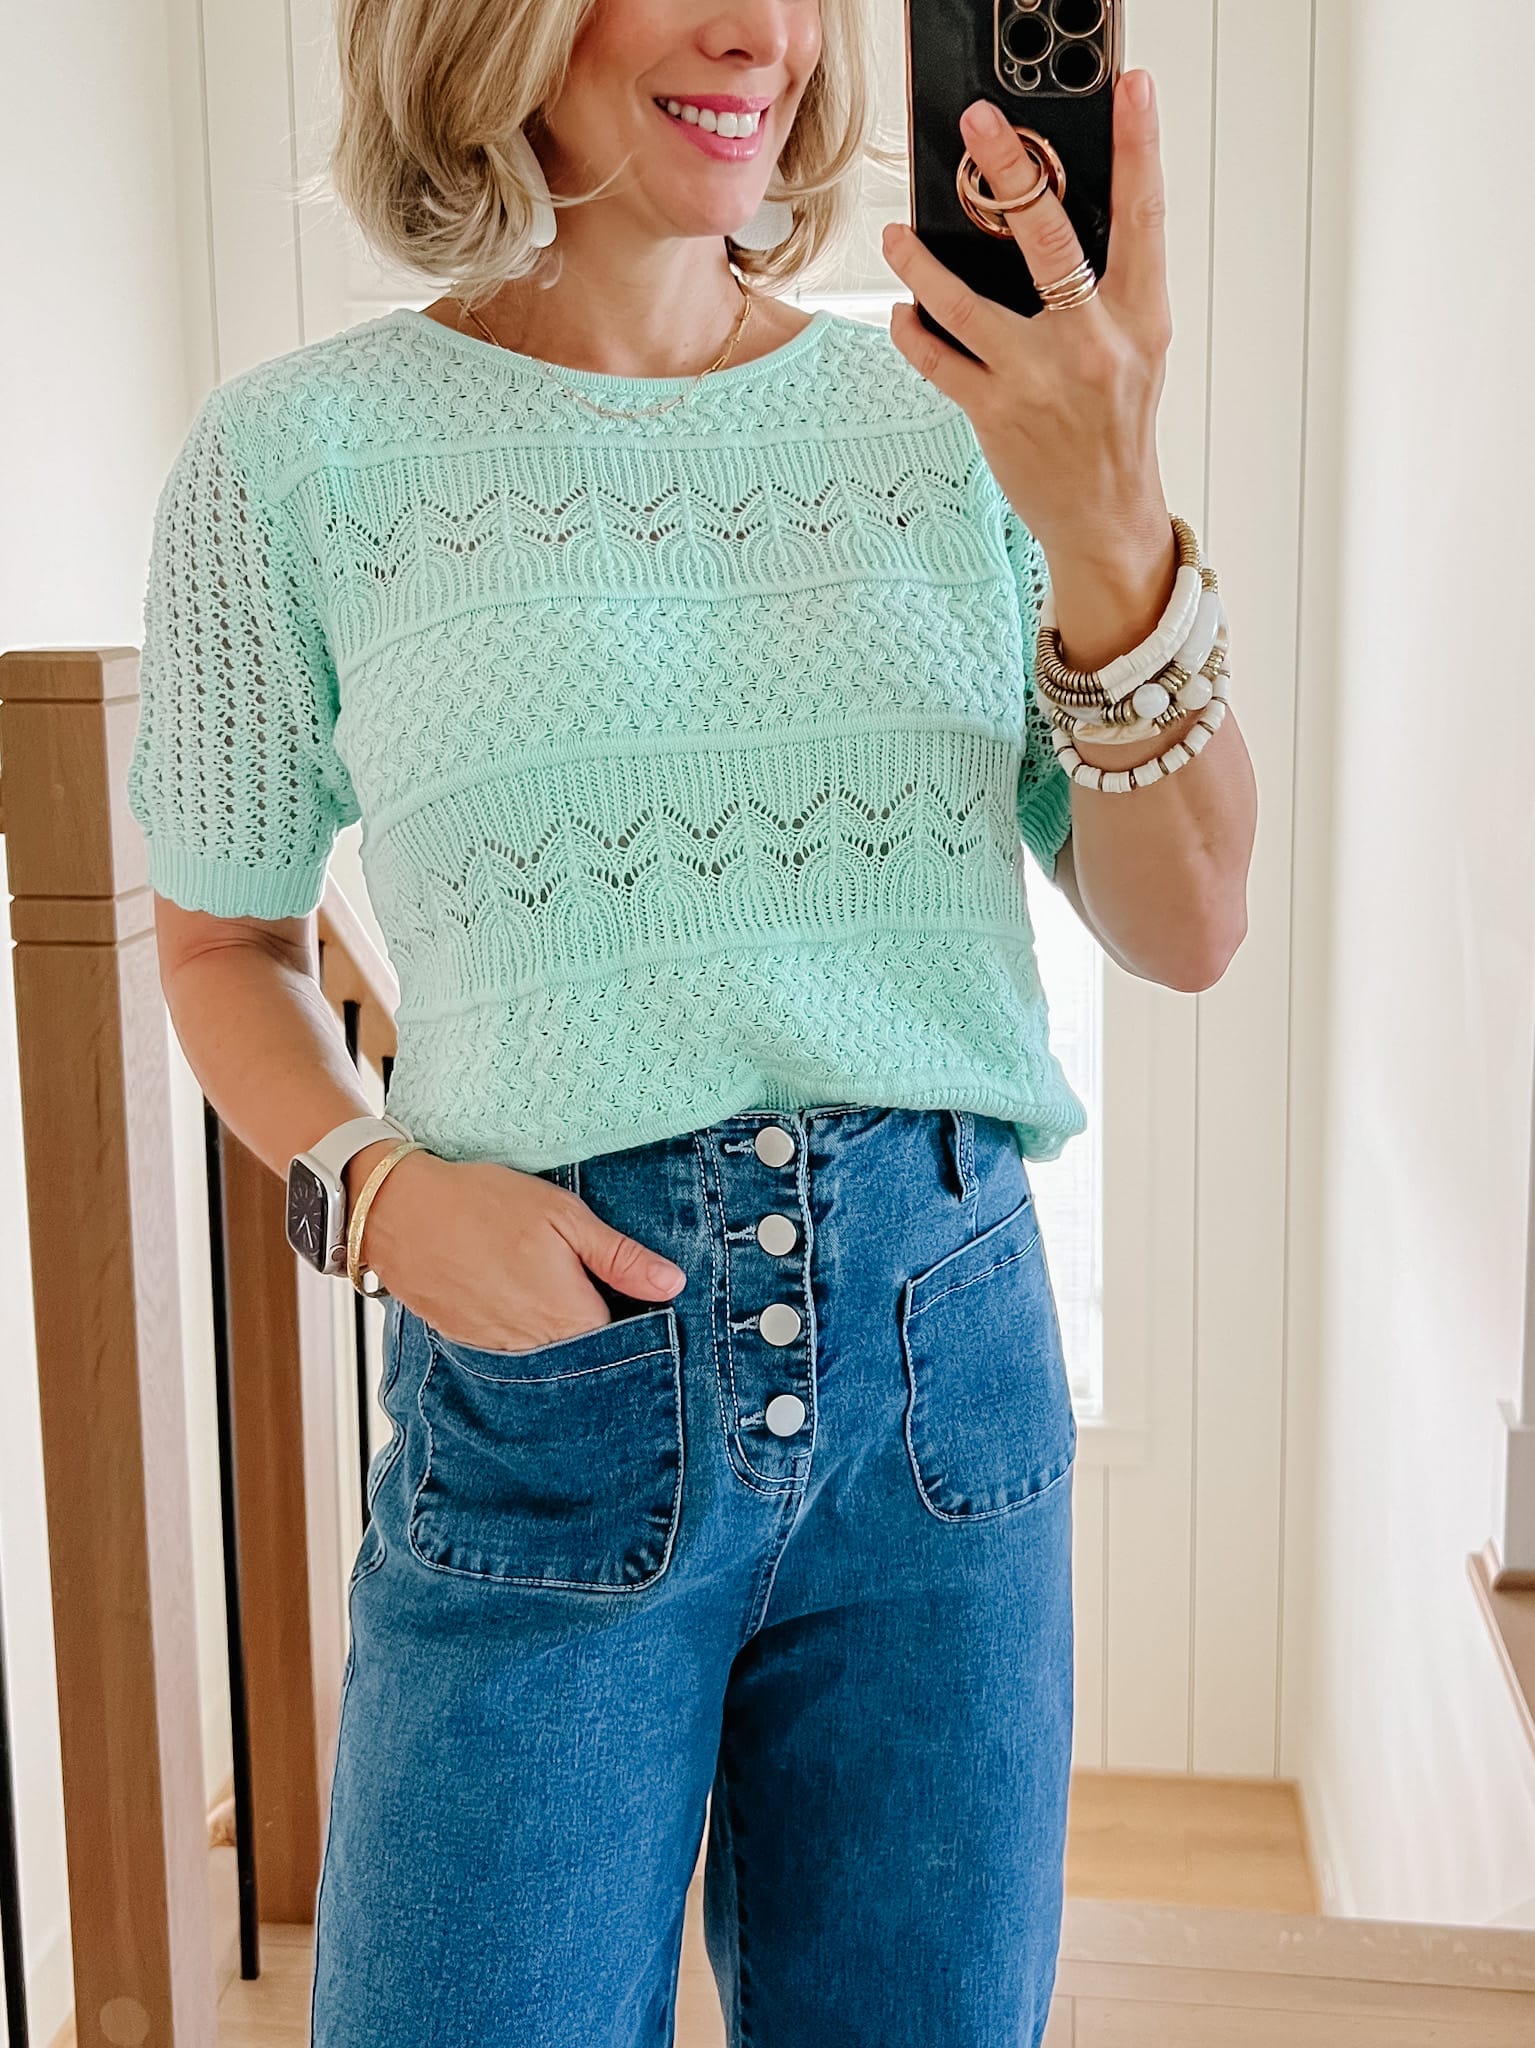 Green Sweater, Button Fly Jeans, Clear Sandals 